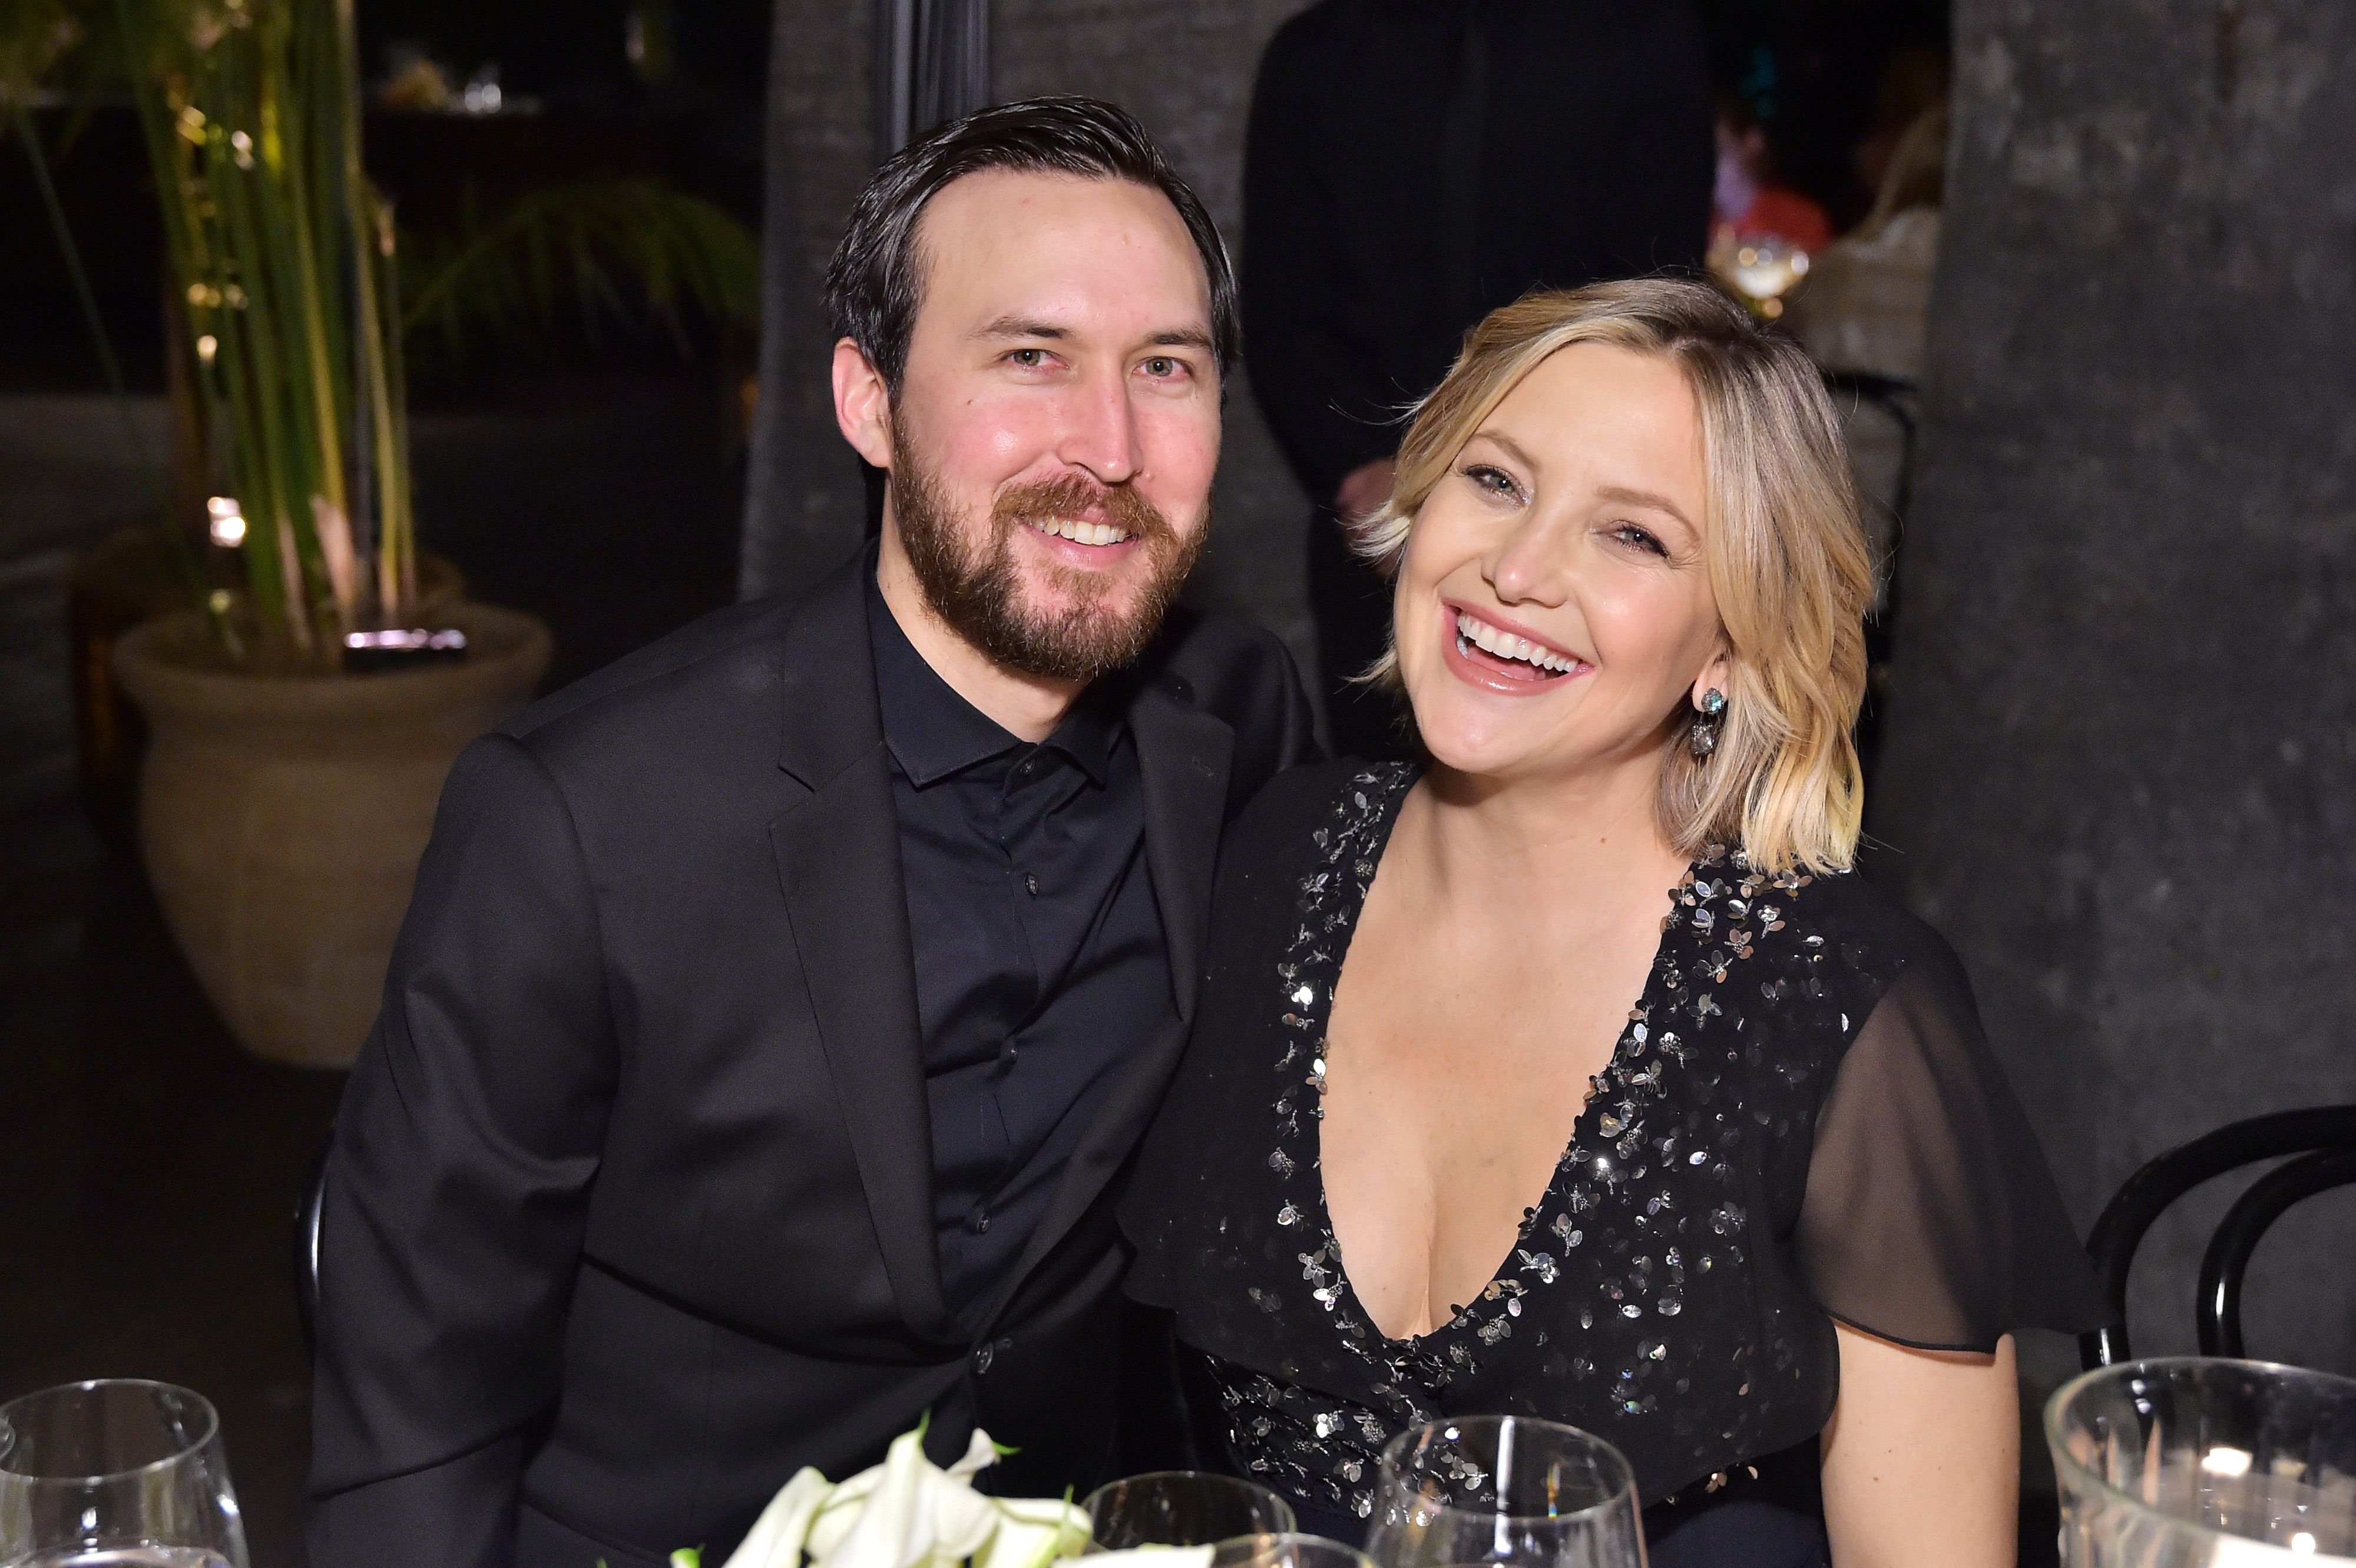 Danny Fujikawa and Kate Hudson at a Michael Kors Dinner to celebrate Hudson and The World Food Programme on November 7, 2018, in Beverly Hills, California | Photo: Stefanie Keenan/Getty Images